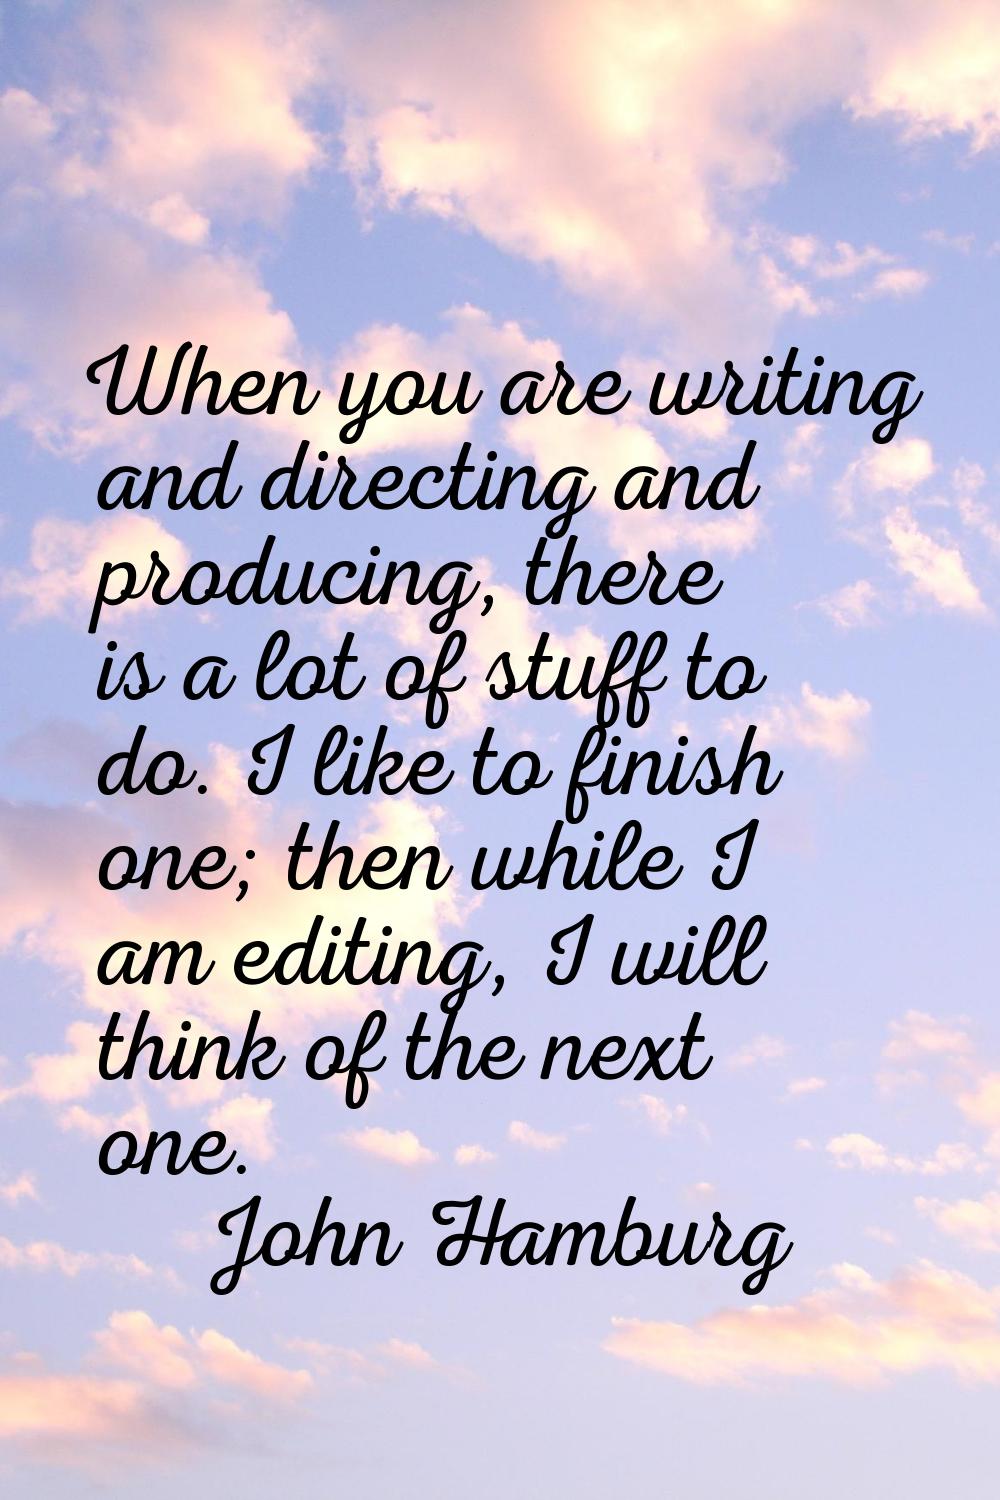 When you are writing and directing and producing, there is a lot of stuff to do. I like to finish o